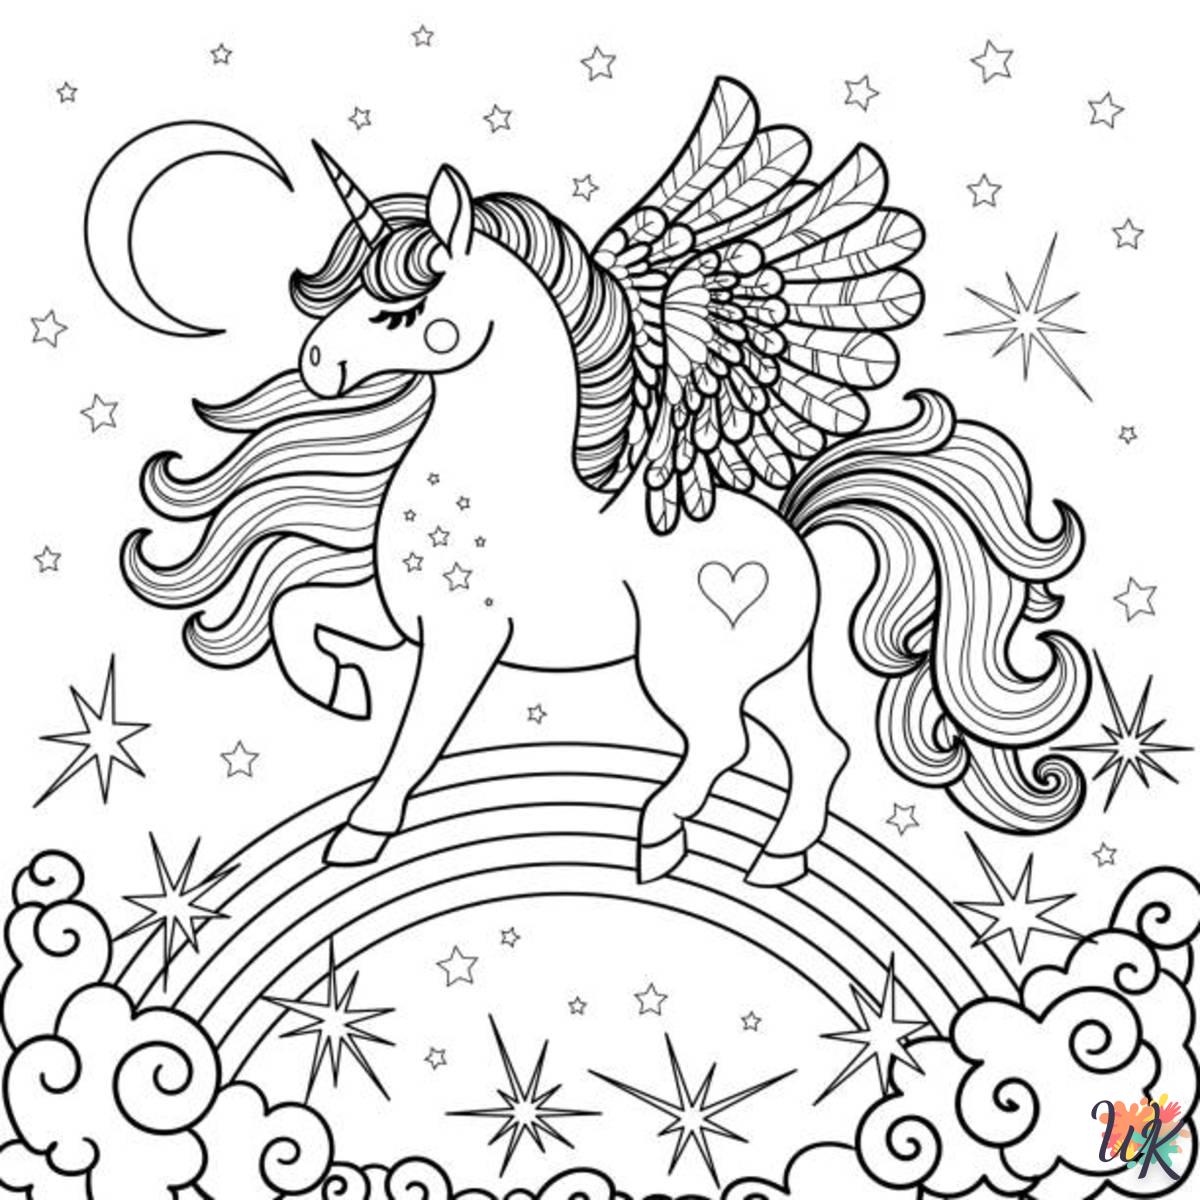 Unicorn ornament coloring pages